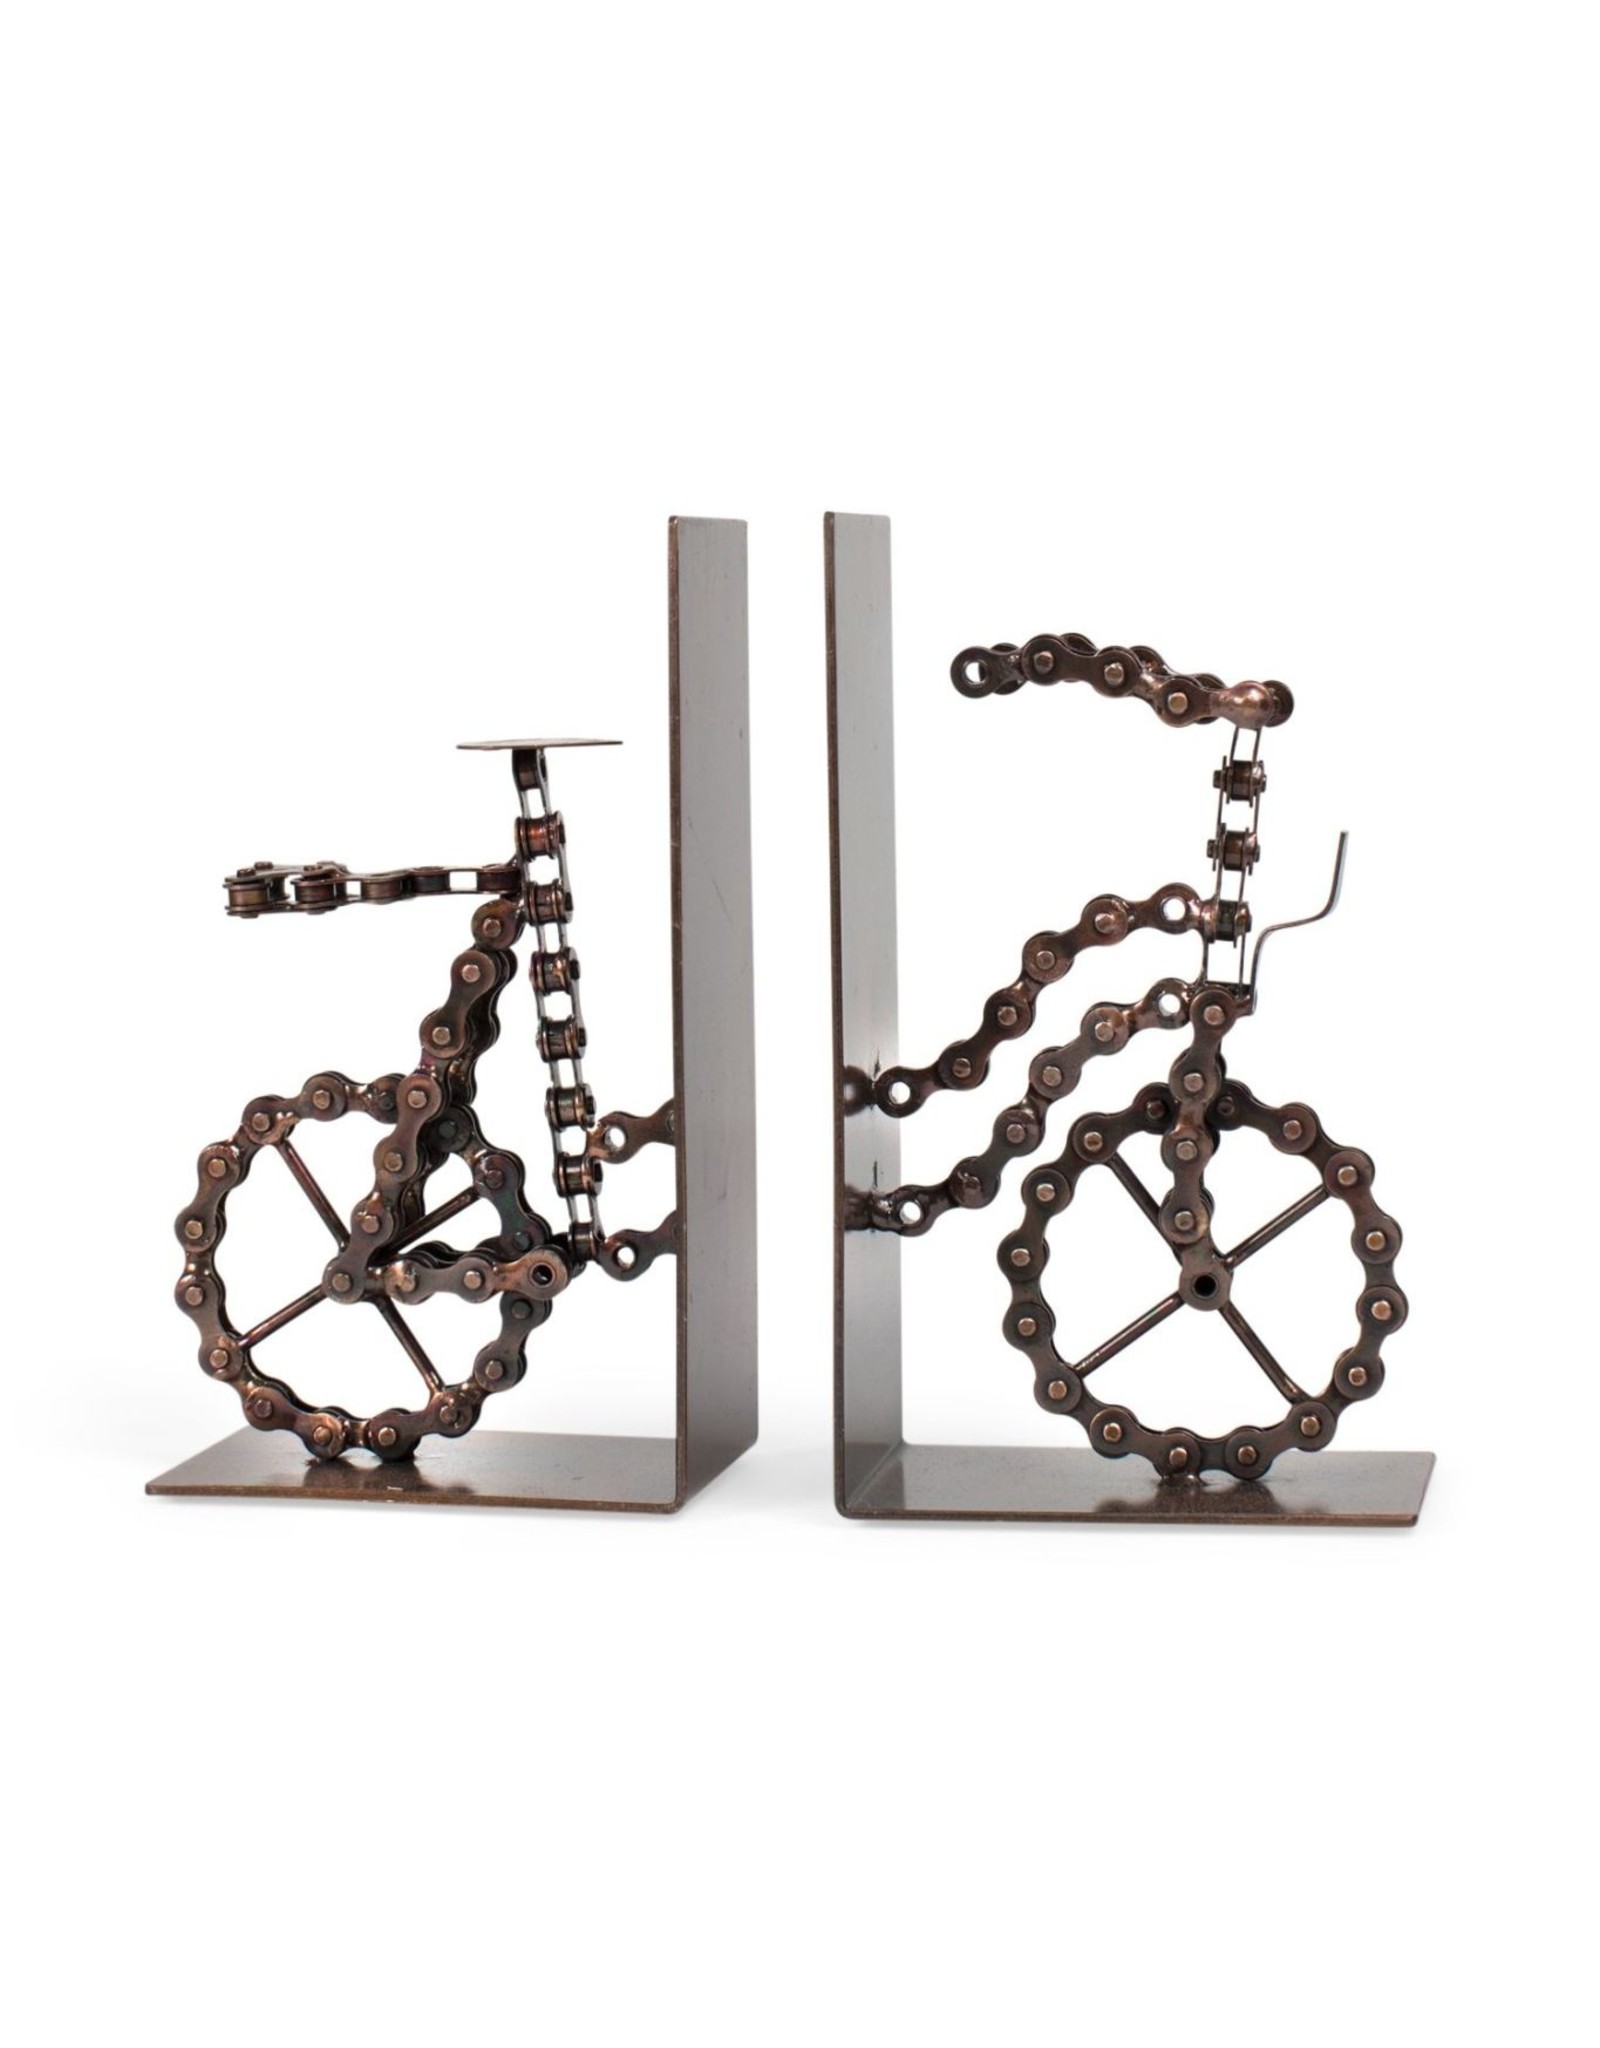 Ten Thousand Villages Bicycle Chain Bookends